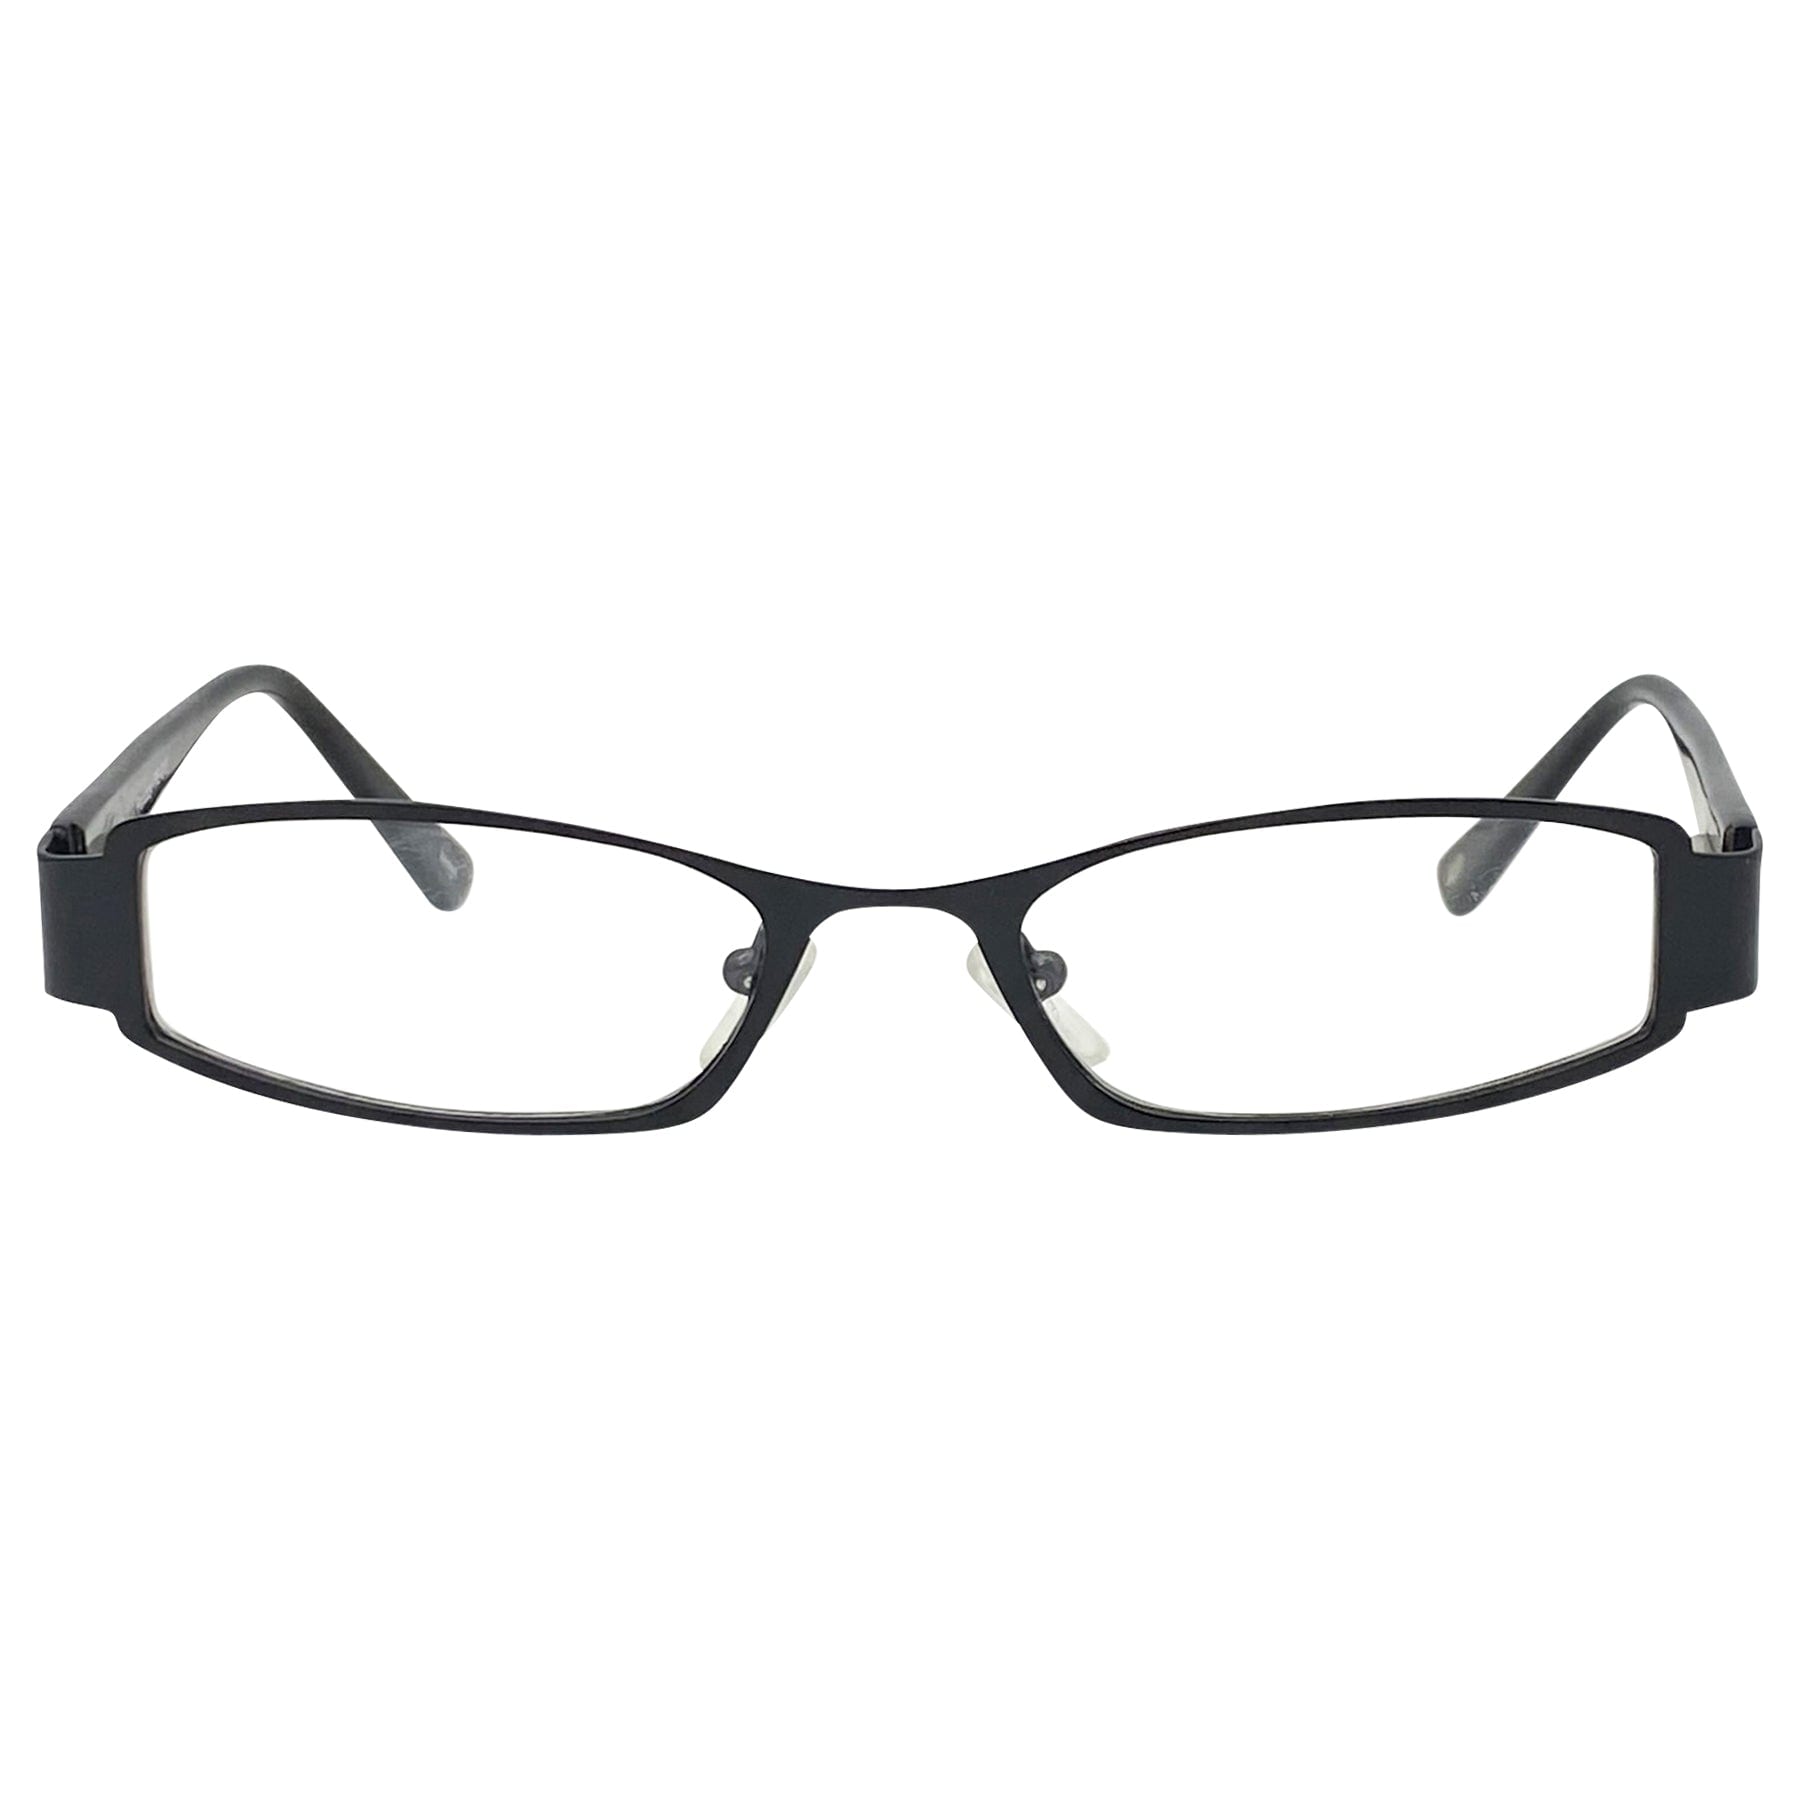 TUNNEL VISION Clear Rectangular 90s Glasses